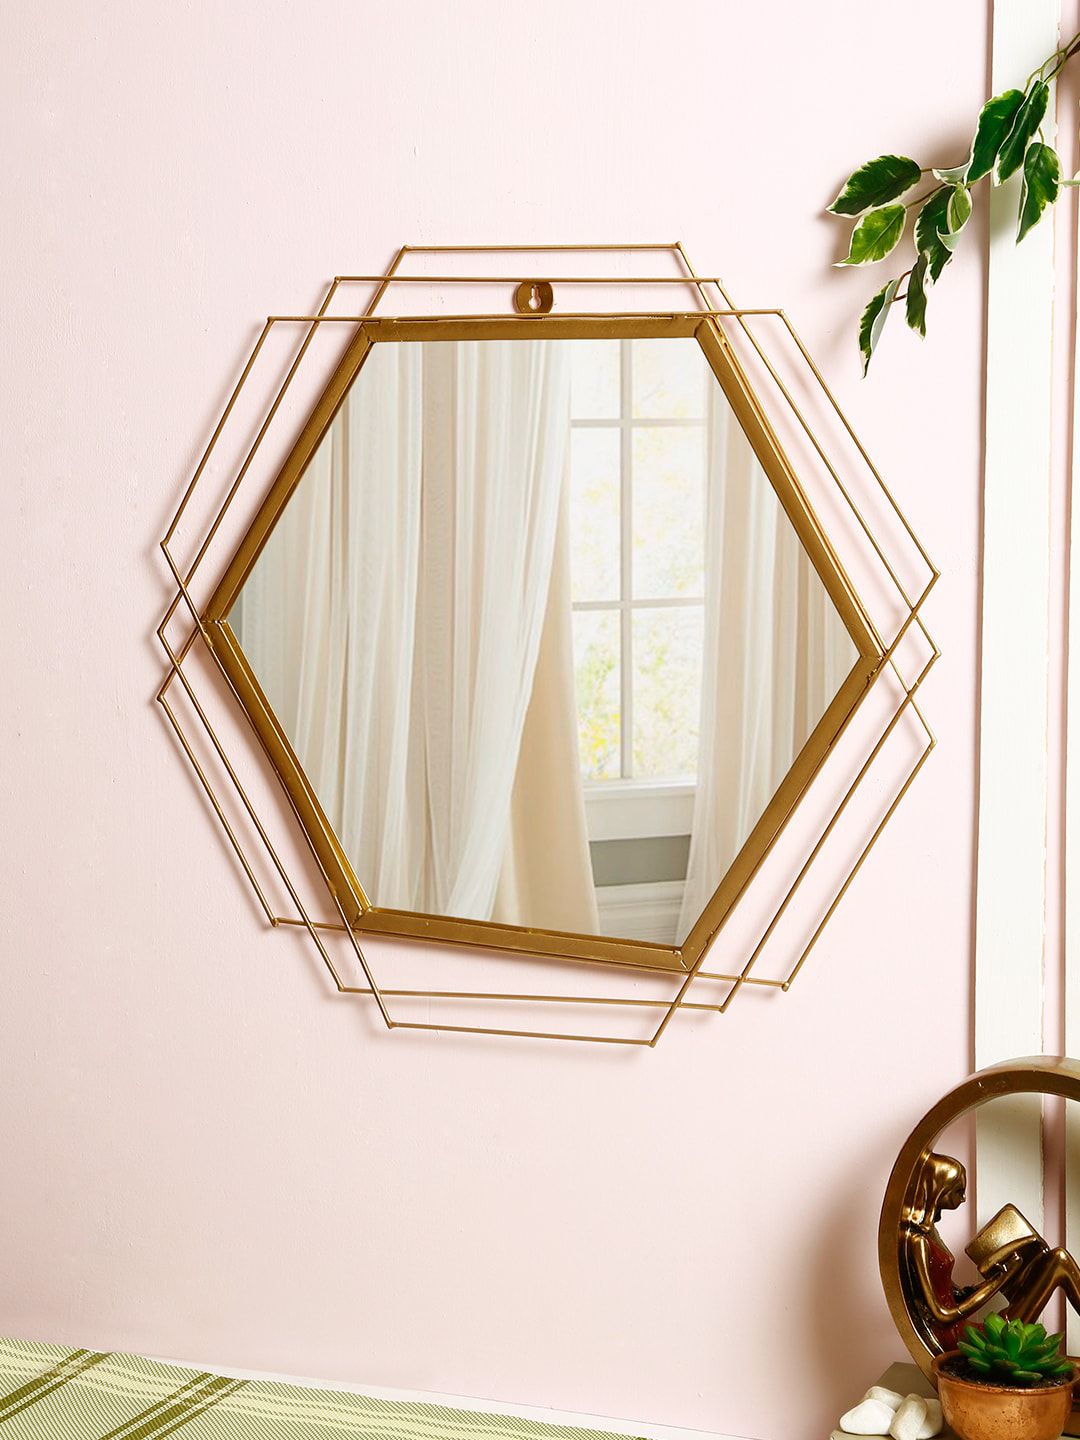 Aapno Rajasthan Gold-Toned Handcrafted Pentagon Framed Wall Mirror Price in India